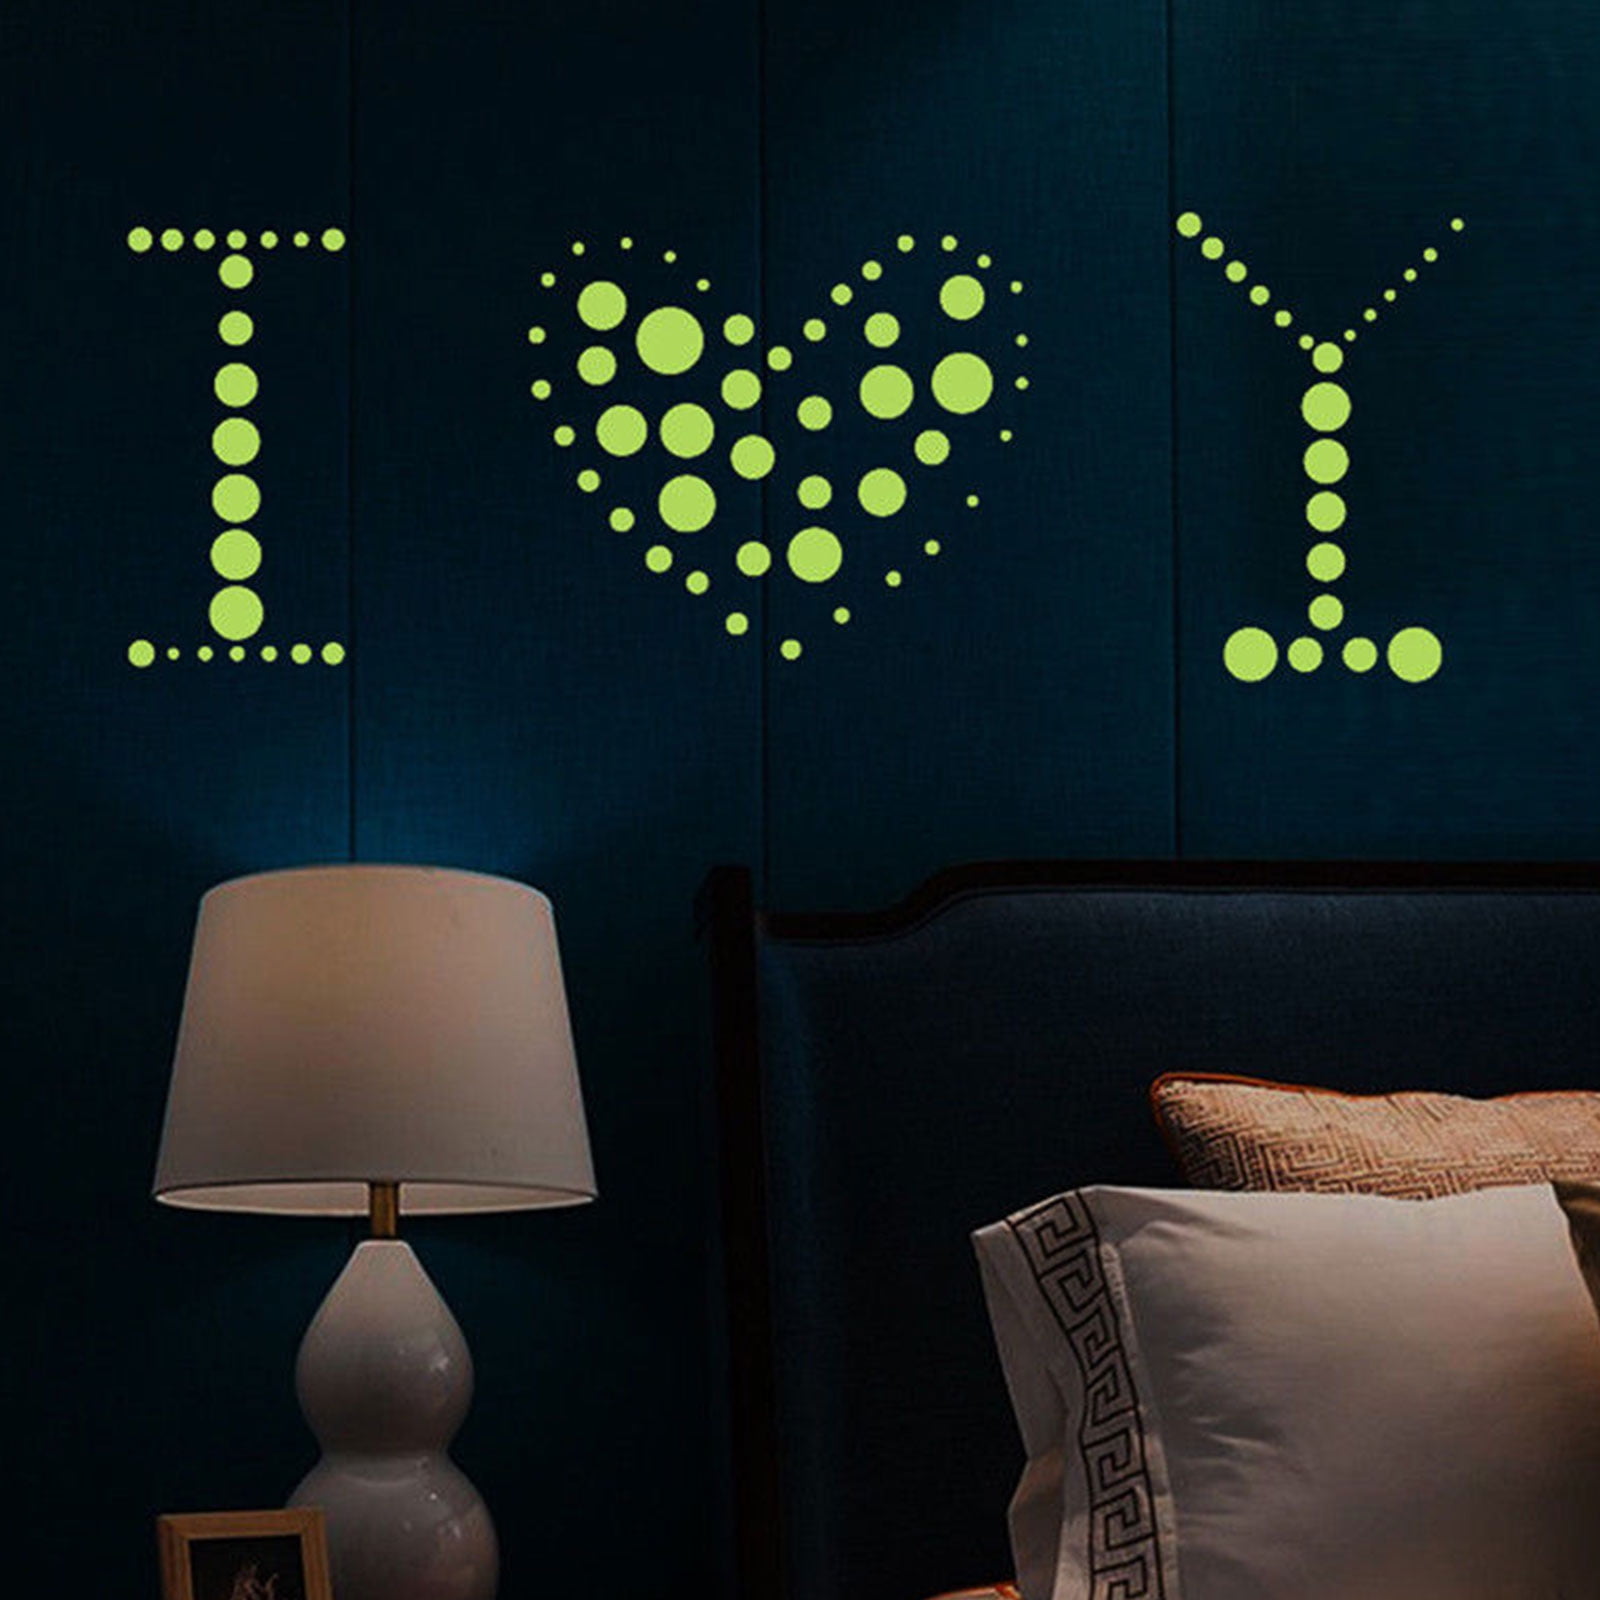 442pcs/set Luminous Moon Stars Dots Wall Sticker Glow In The Dark Stickers  Kids Room Bedroom Living Room Home Decoration Decals